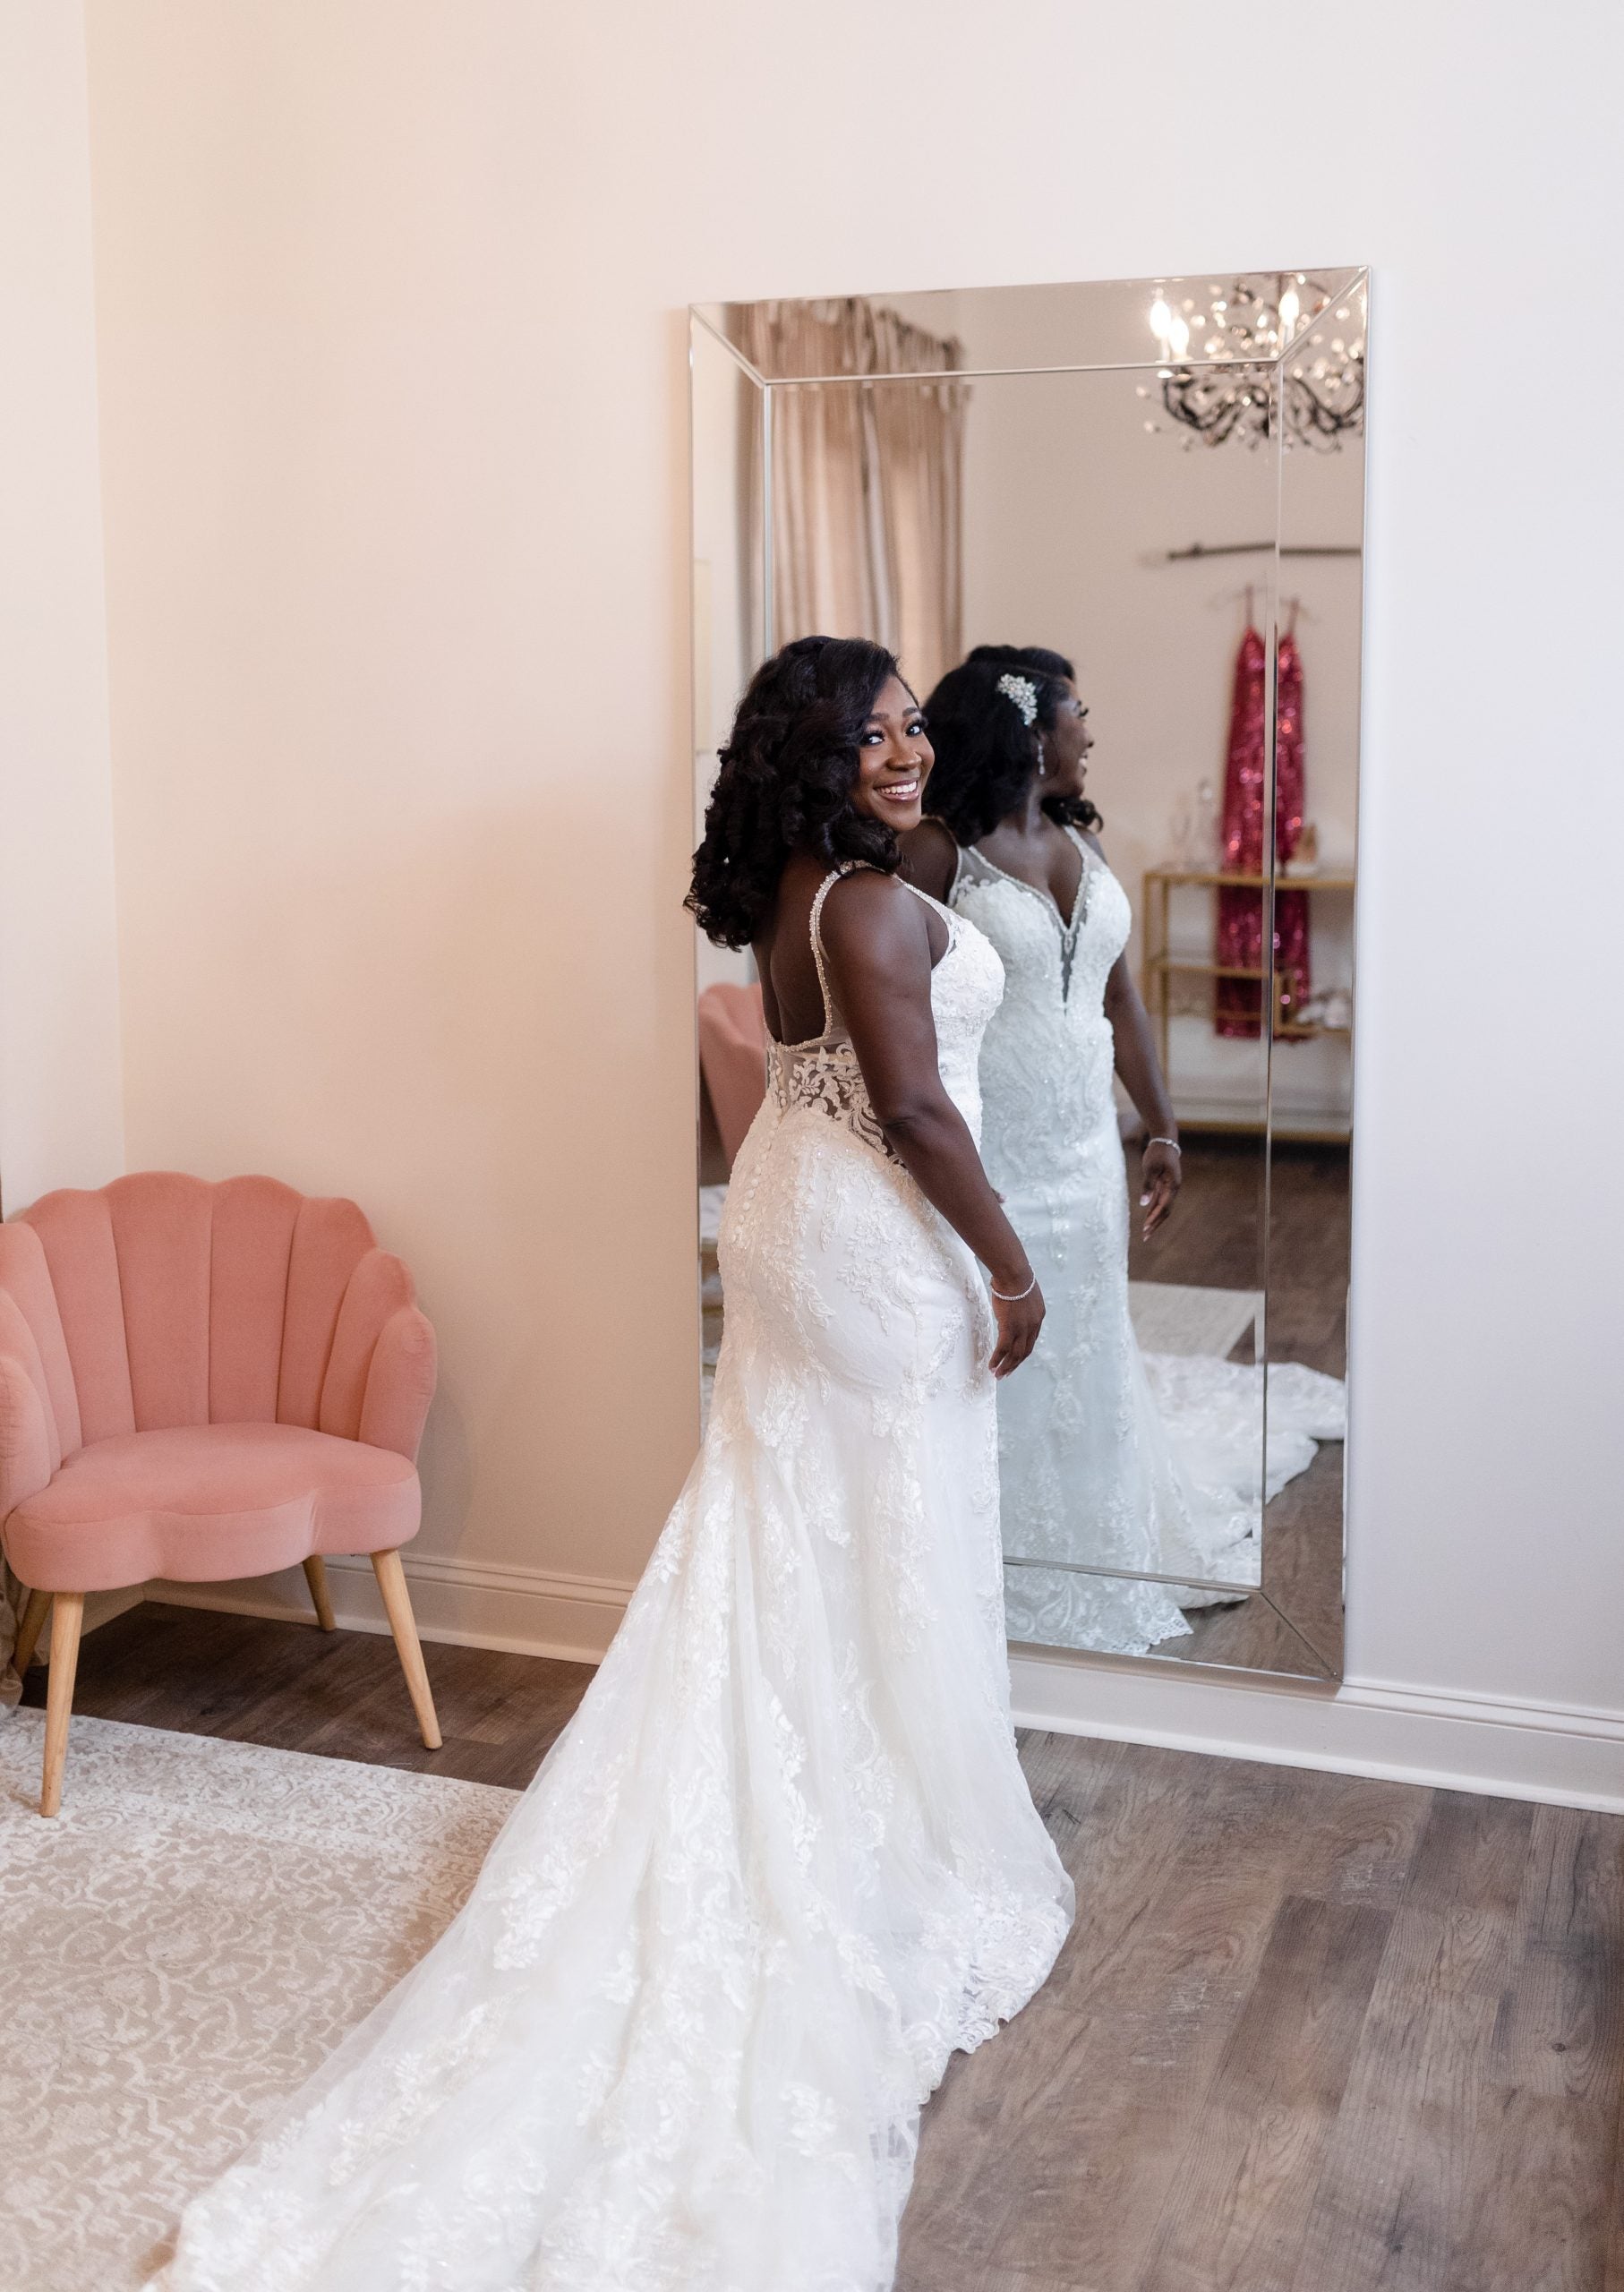 Bridal Bliss: After First Meeting At Caribana, Jackeline and Frederick Met At The Altar For A Perfect Potomac Wedding